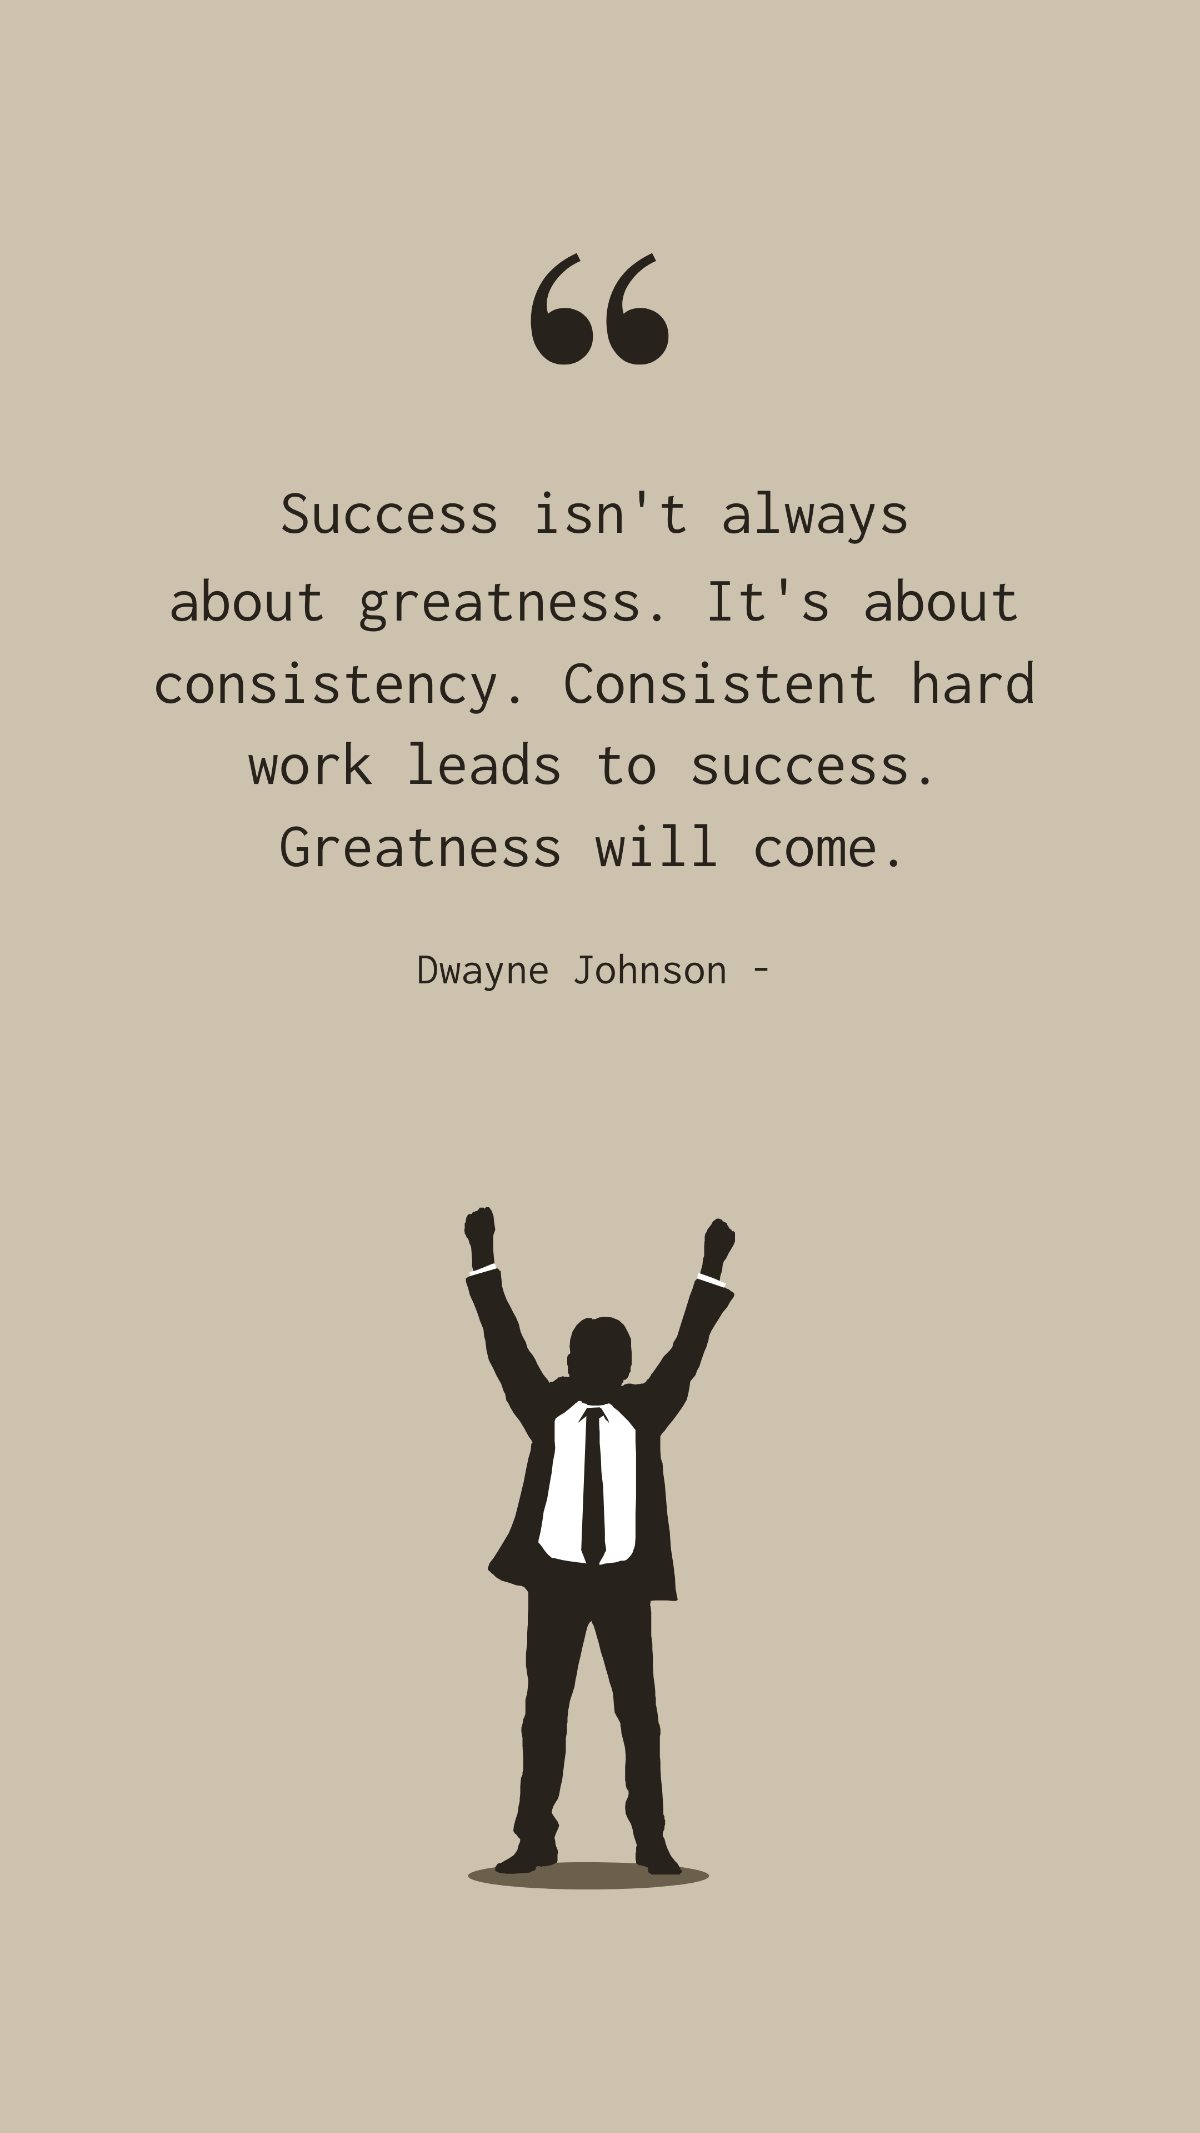 Dwayne Johnson - Success isn't always about greatness. It's about consistency. Consistent hard work leads to success. Greatness will come. Template